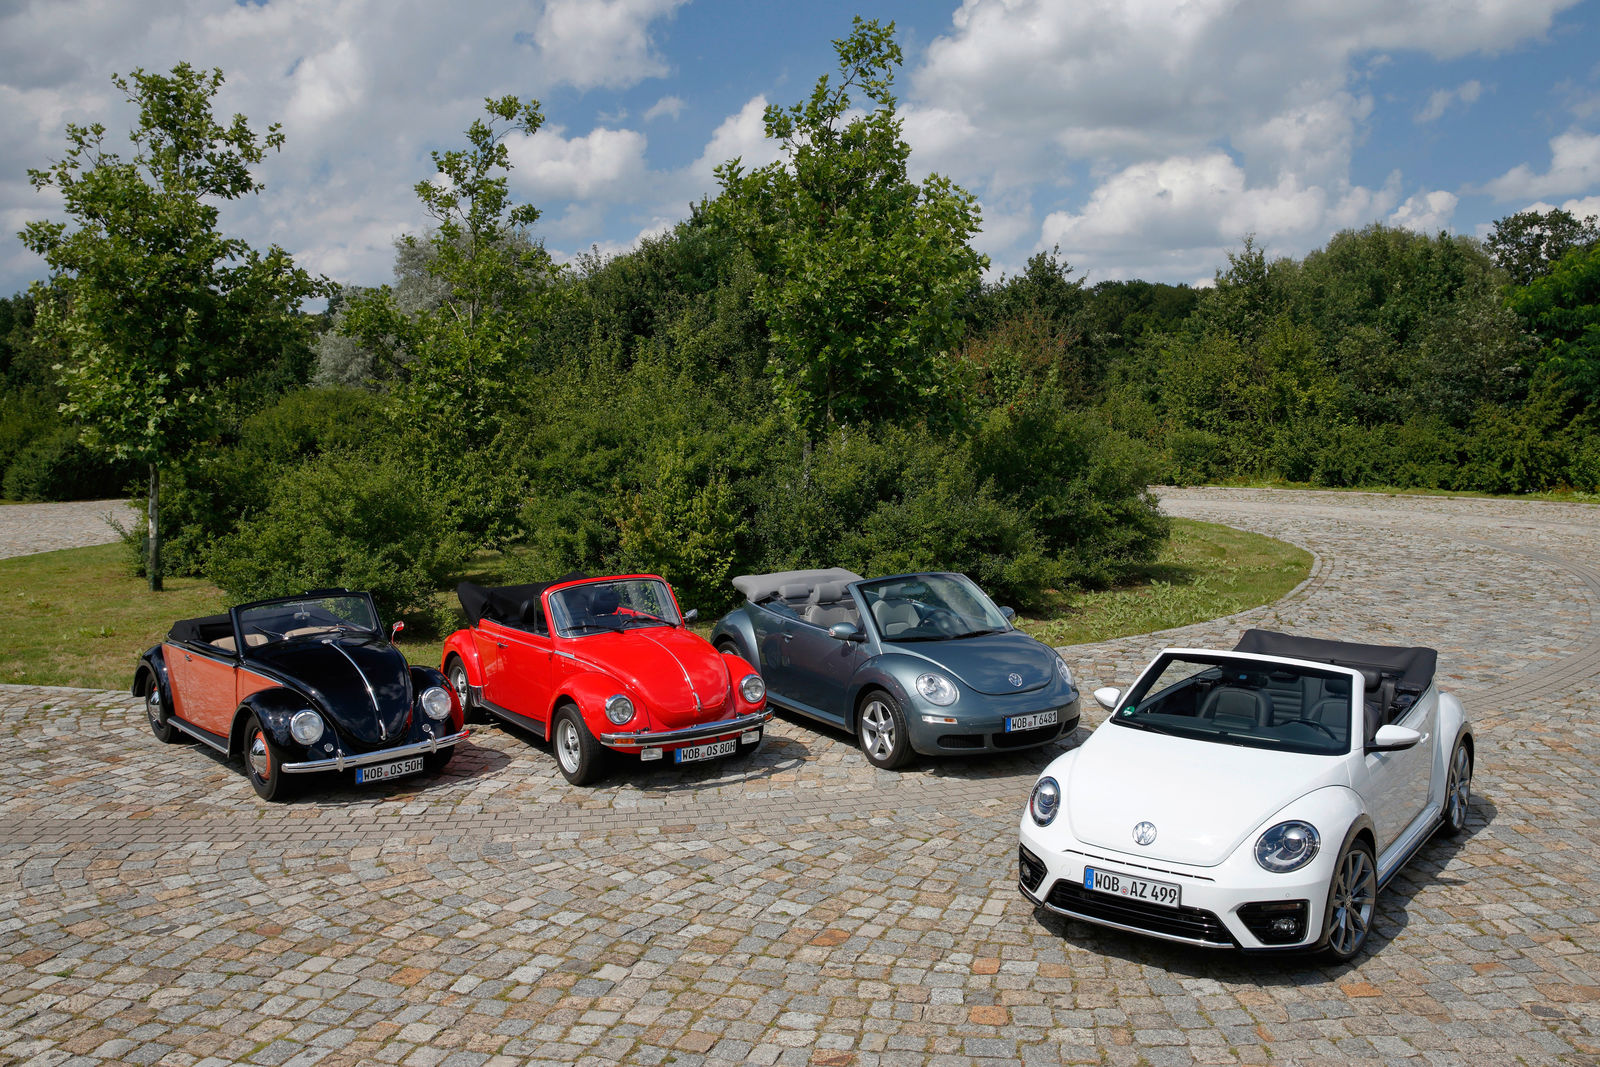 Beetle Sunshine Tour 2017 starts on Friday - Largest Beetle meeting in the world in Travemünde